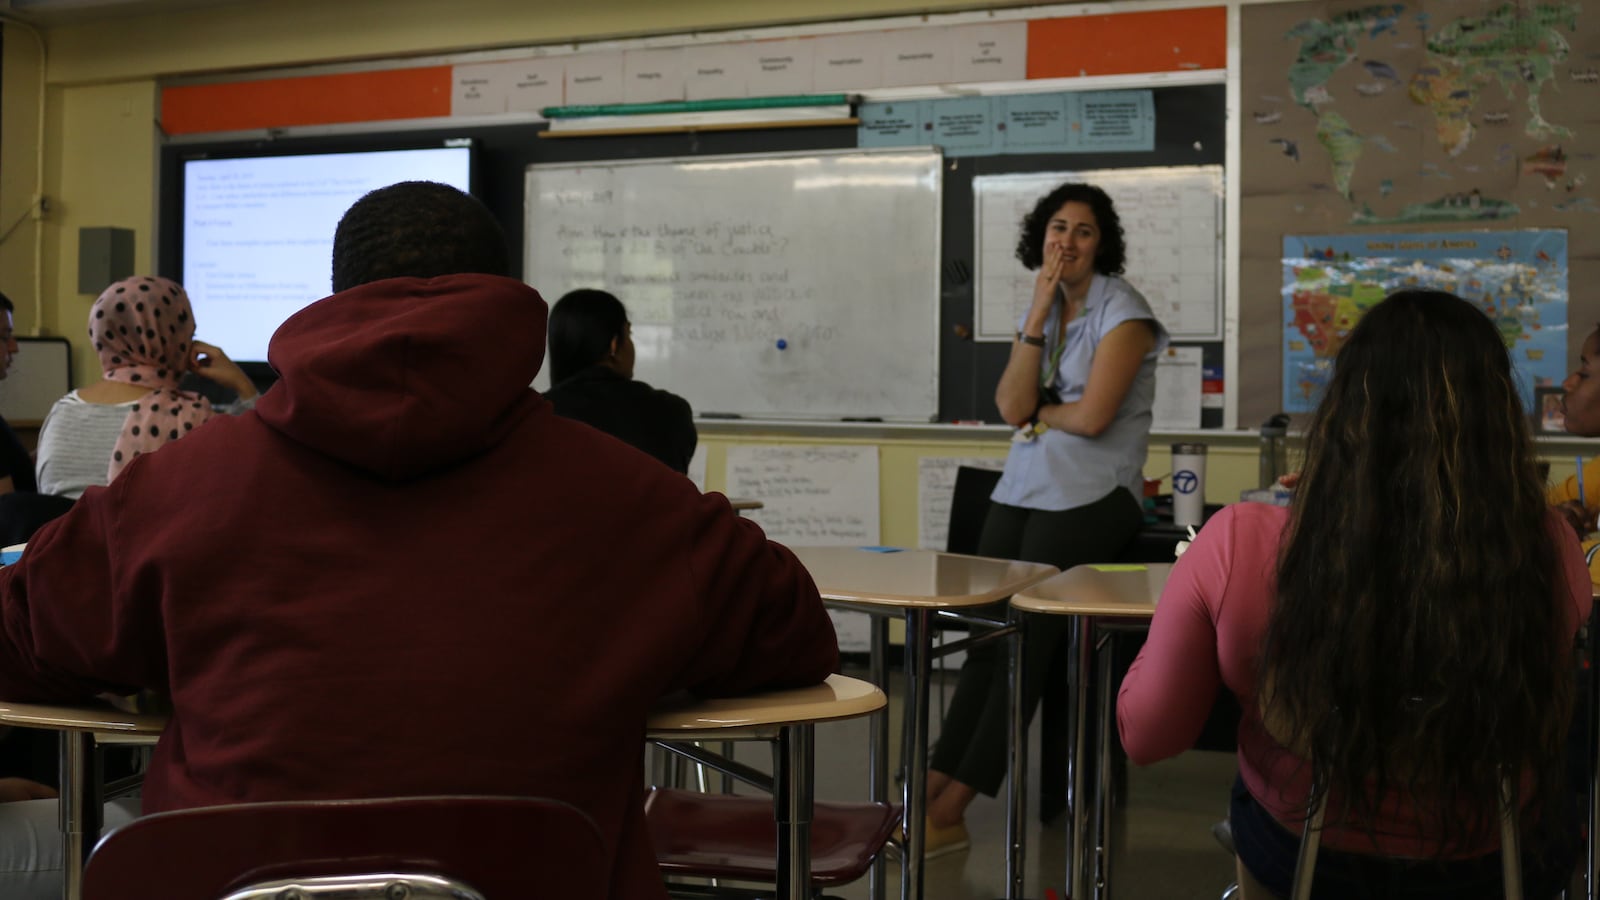 An English teacher chats about “The Crucible” with her class at ELLIS Prep Academy in the Bronx, a transfer school that serves immigrant students.